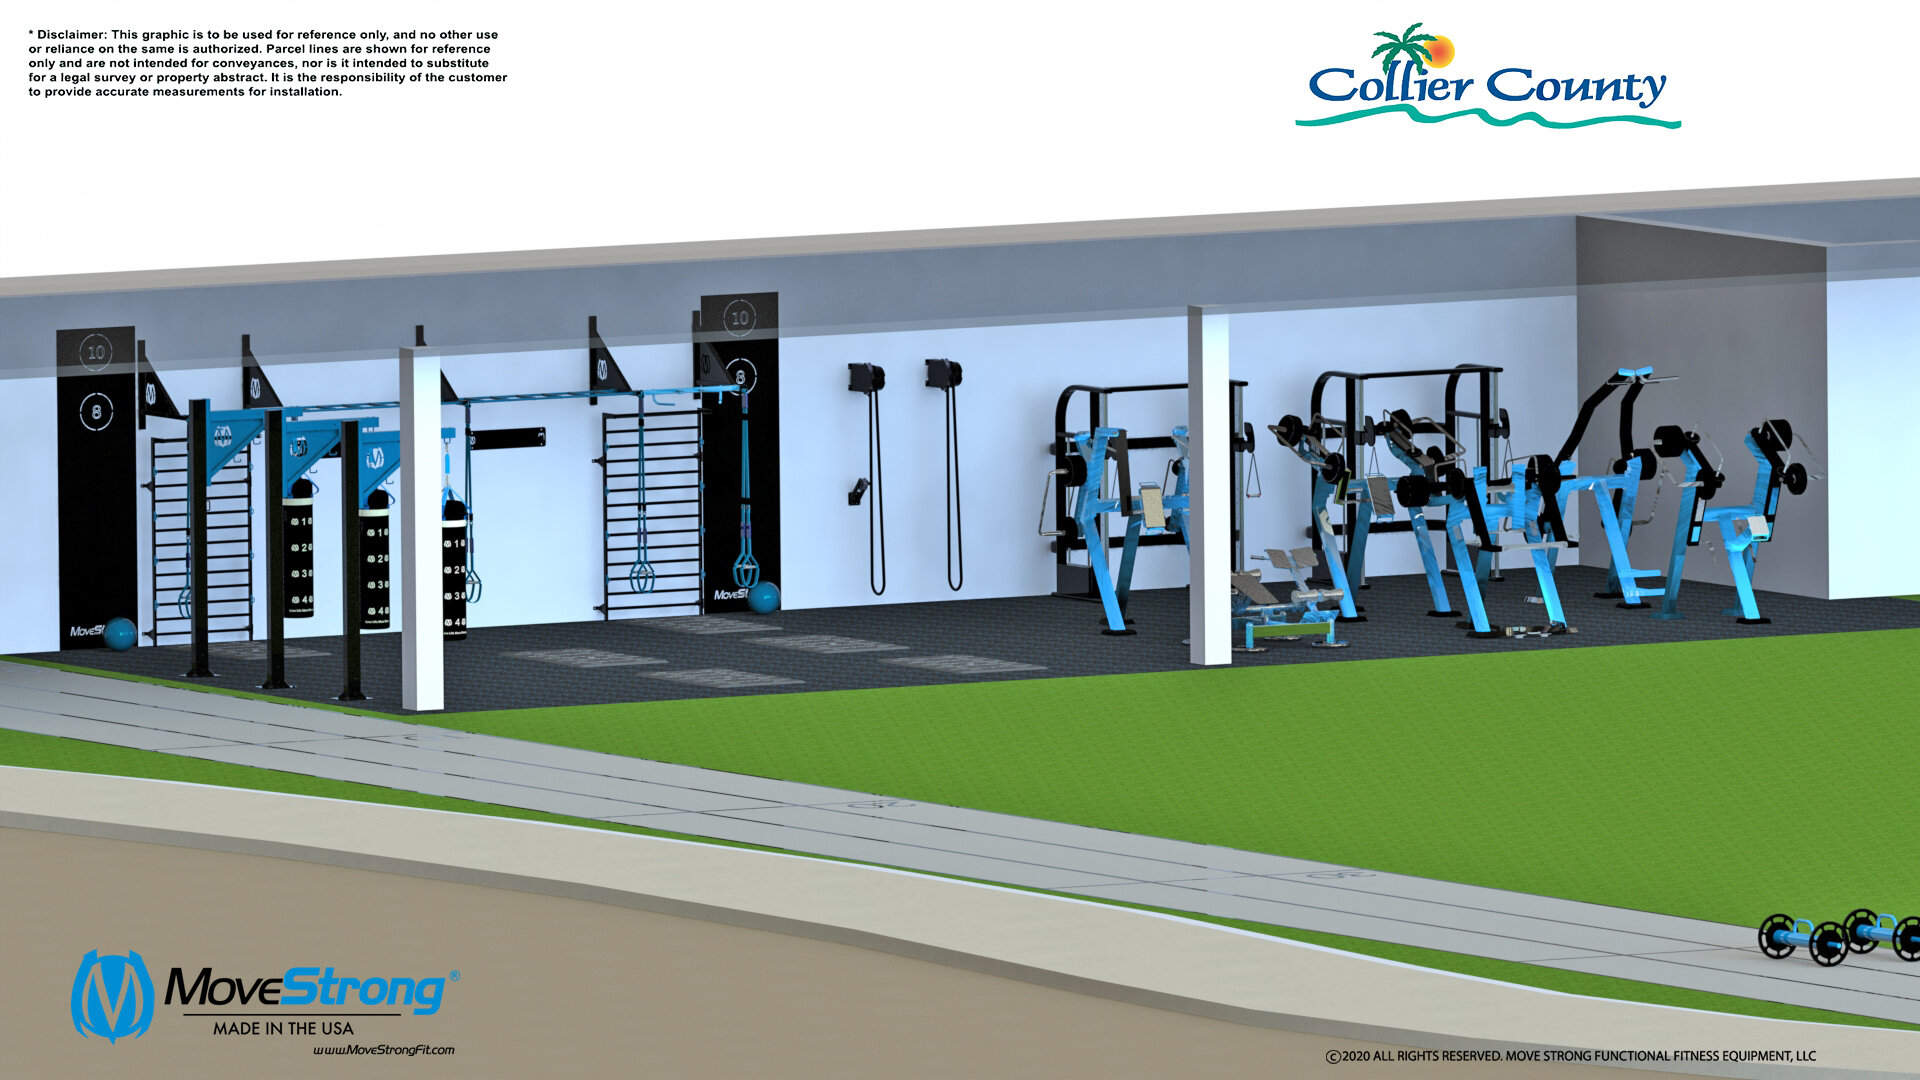 MoveStrong _Collier County_Fitness Pavillion_ Covered area_render_28_FINAL_4-13-20 copy.jpg